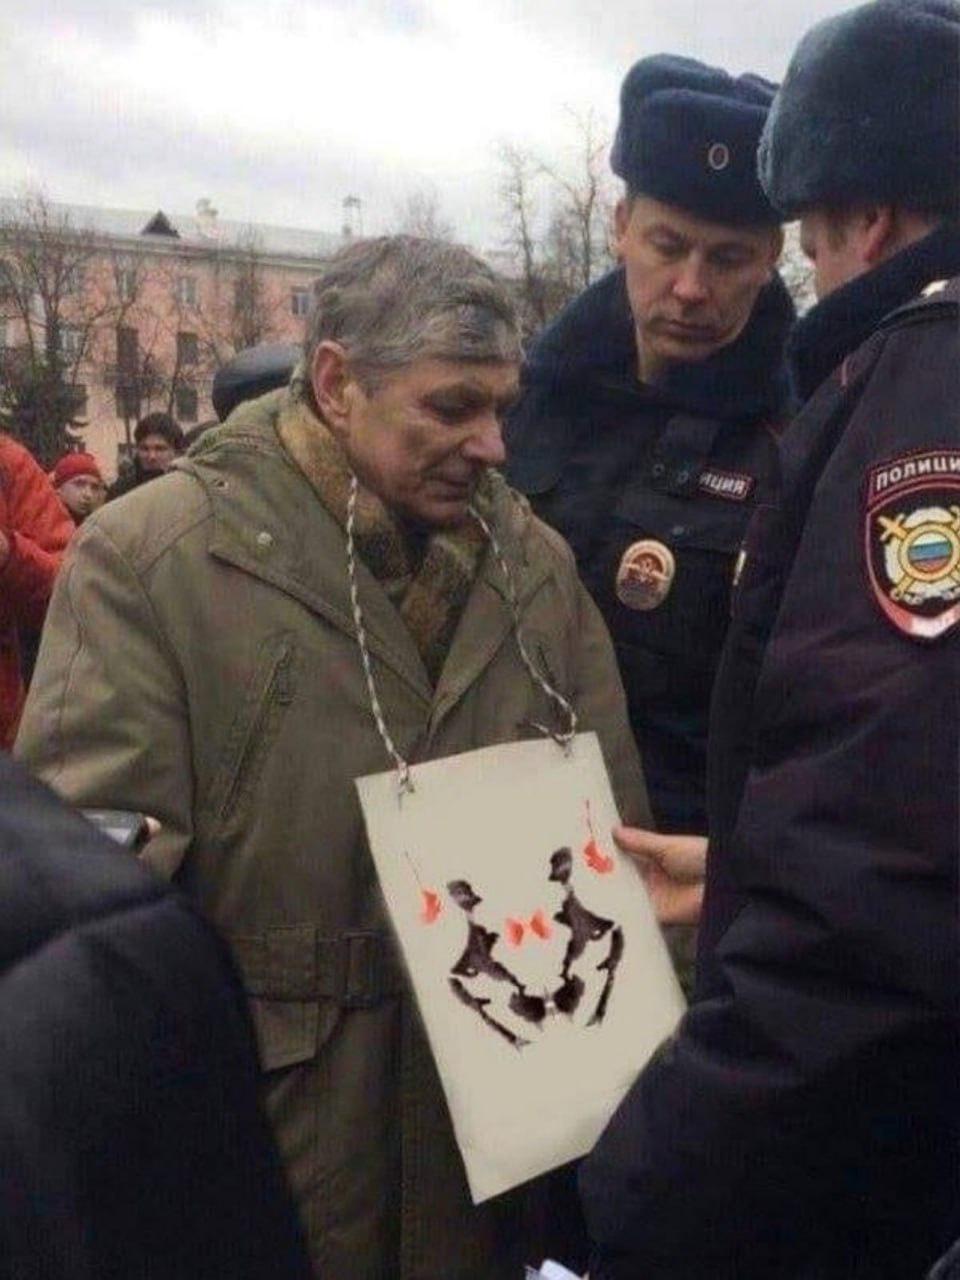 I ponder what Russian police officers will see there